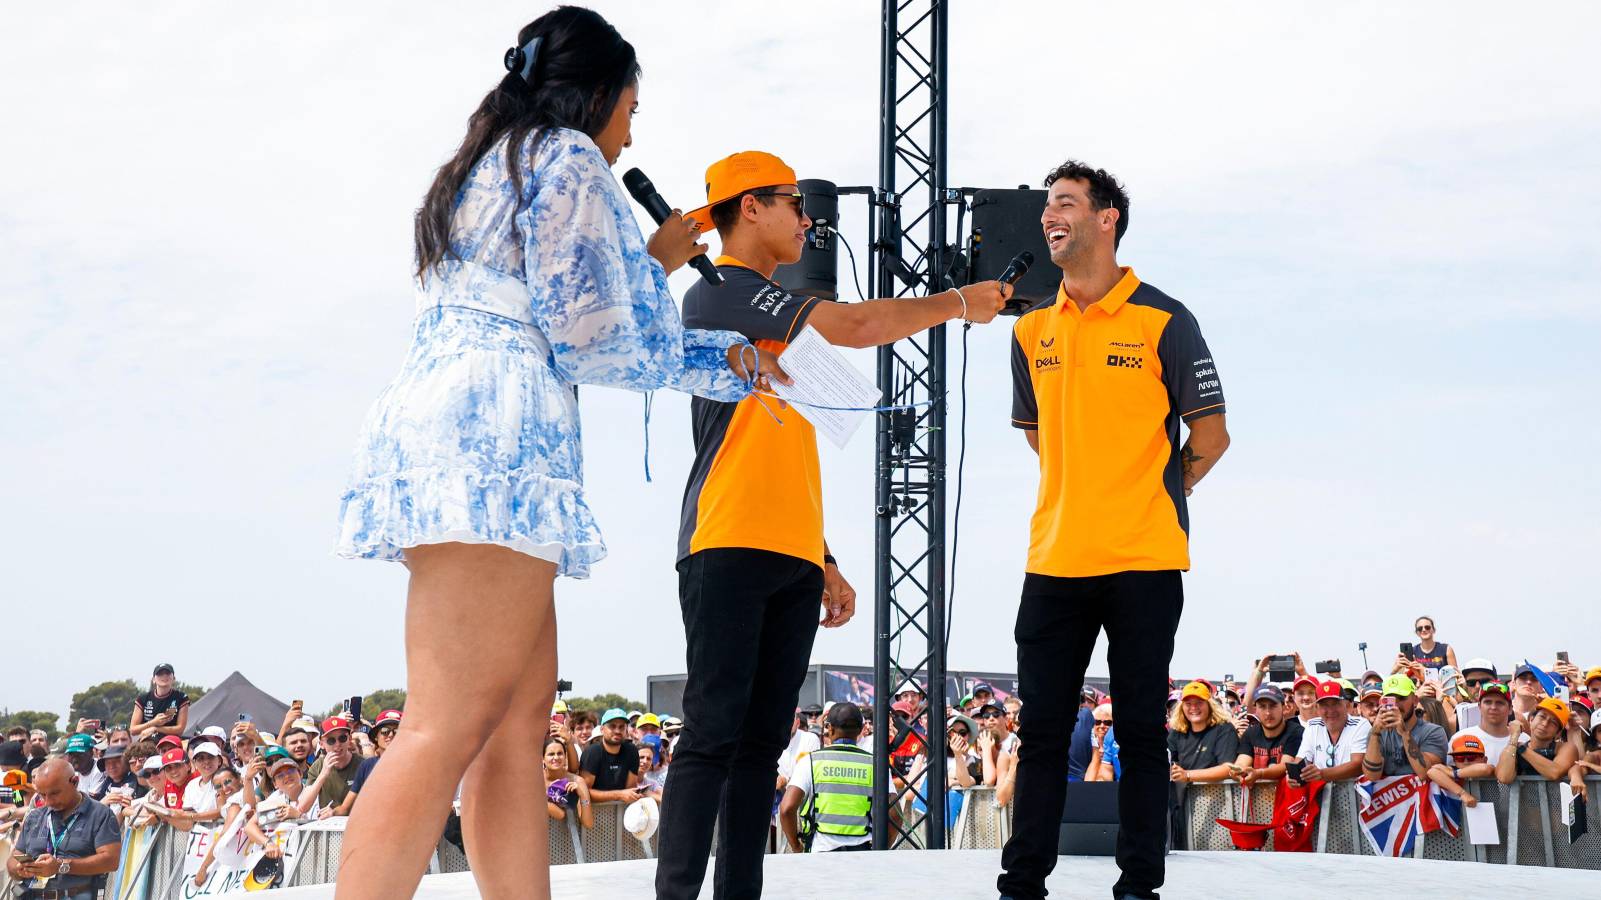 Lando Norris and Daniel Ricciardo being interviewed during a fans' event. Paul Ricard July 2022.